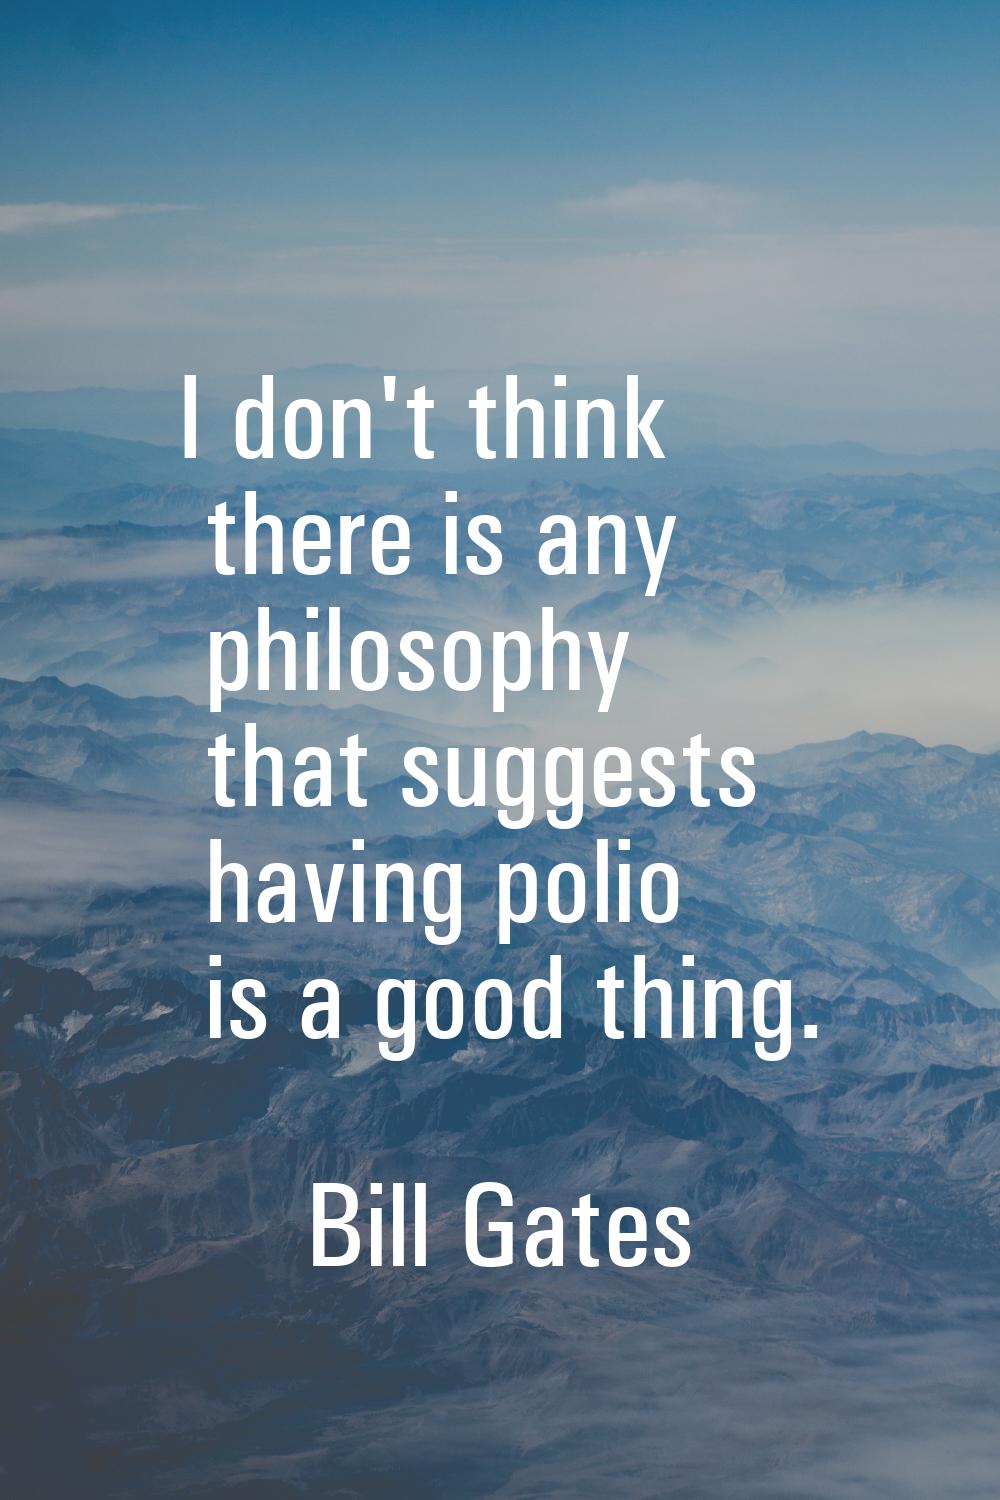 I don't think there is any philosophy that suggests having polio is a good thing.